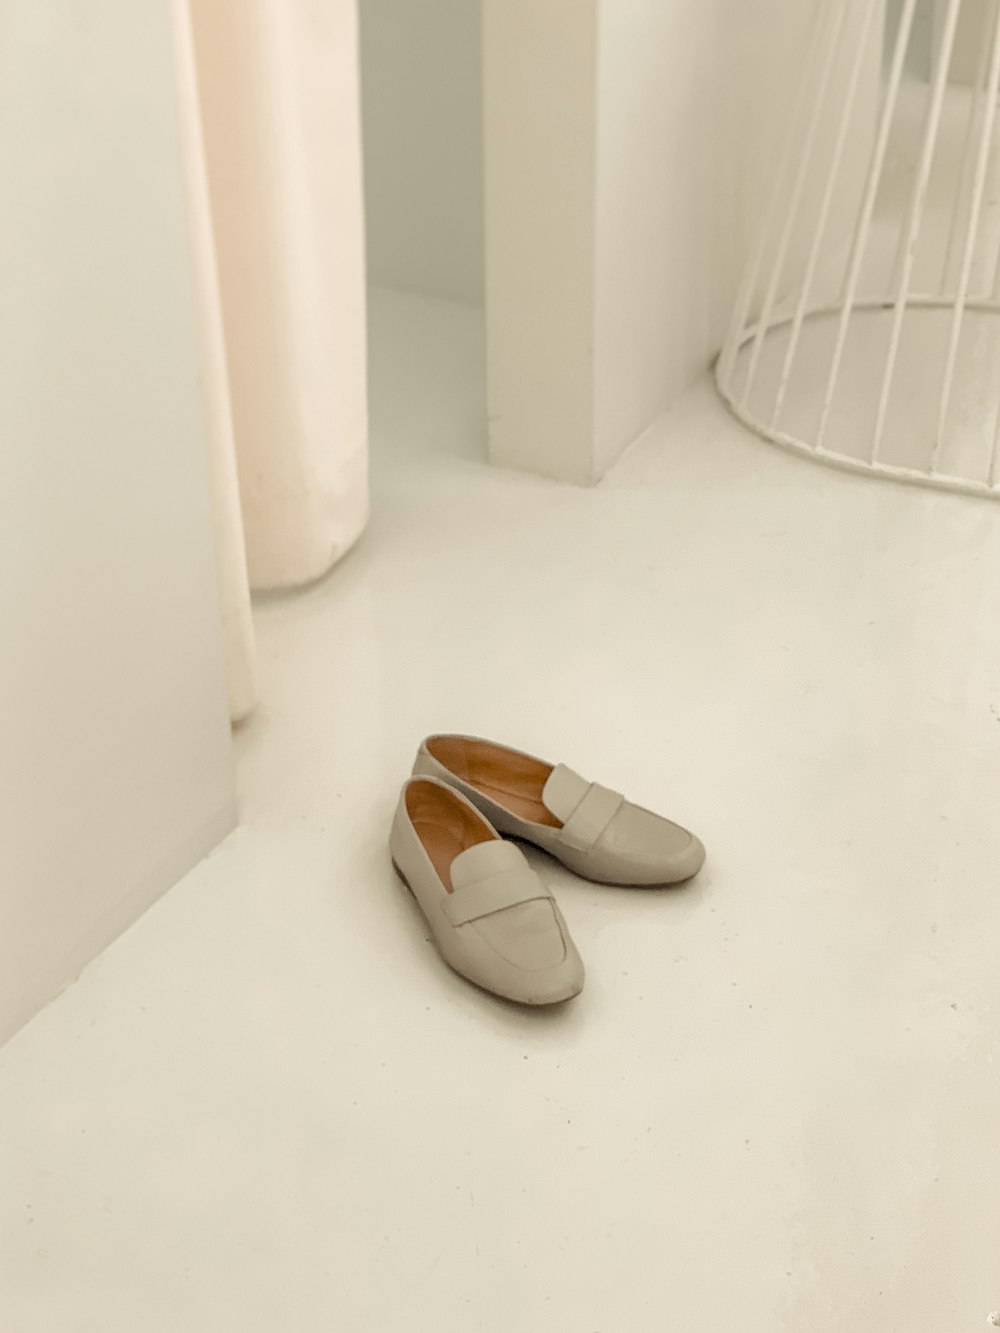 grey shoes in a roomclose-up photography